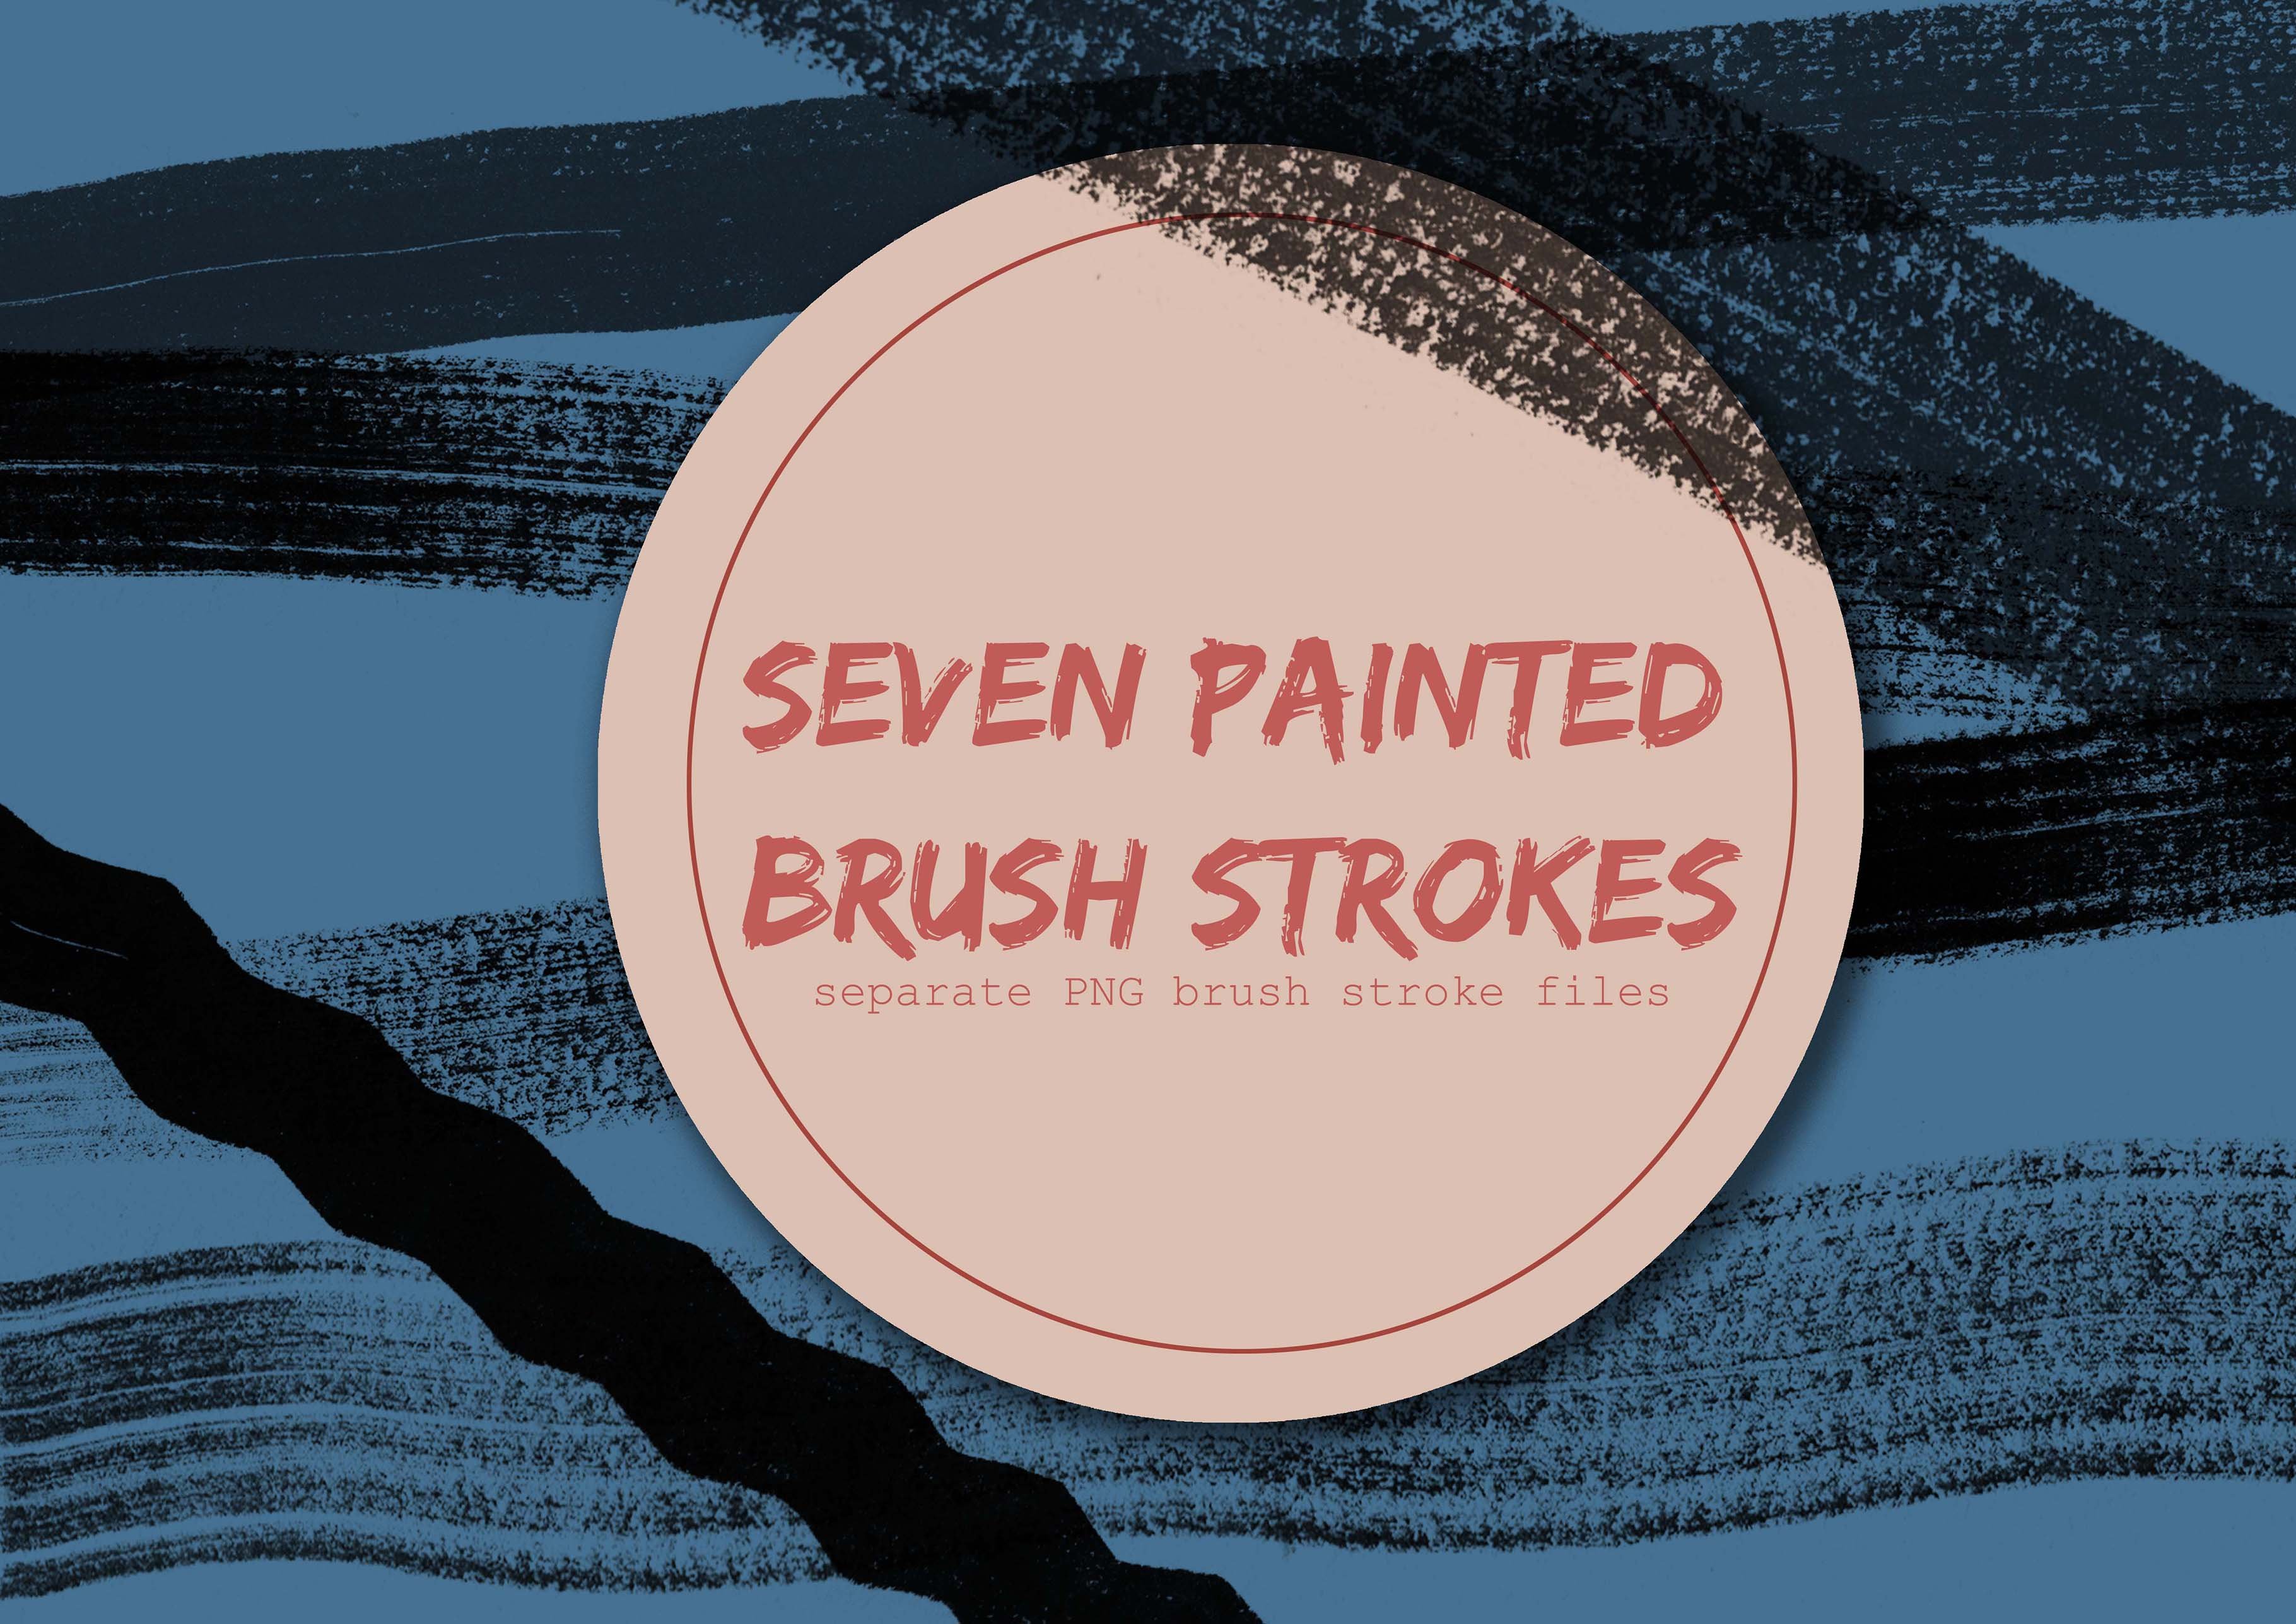 Painted texture ink brush strokescover image.